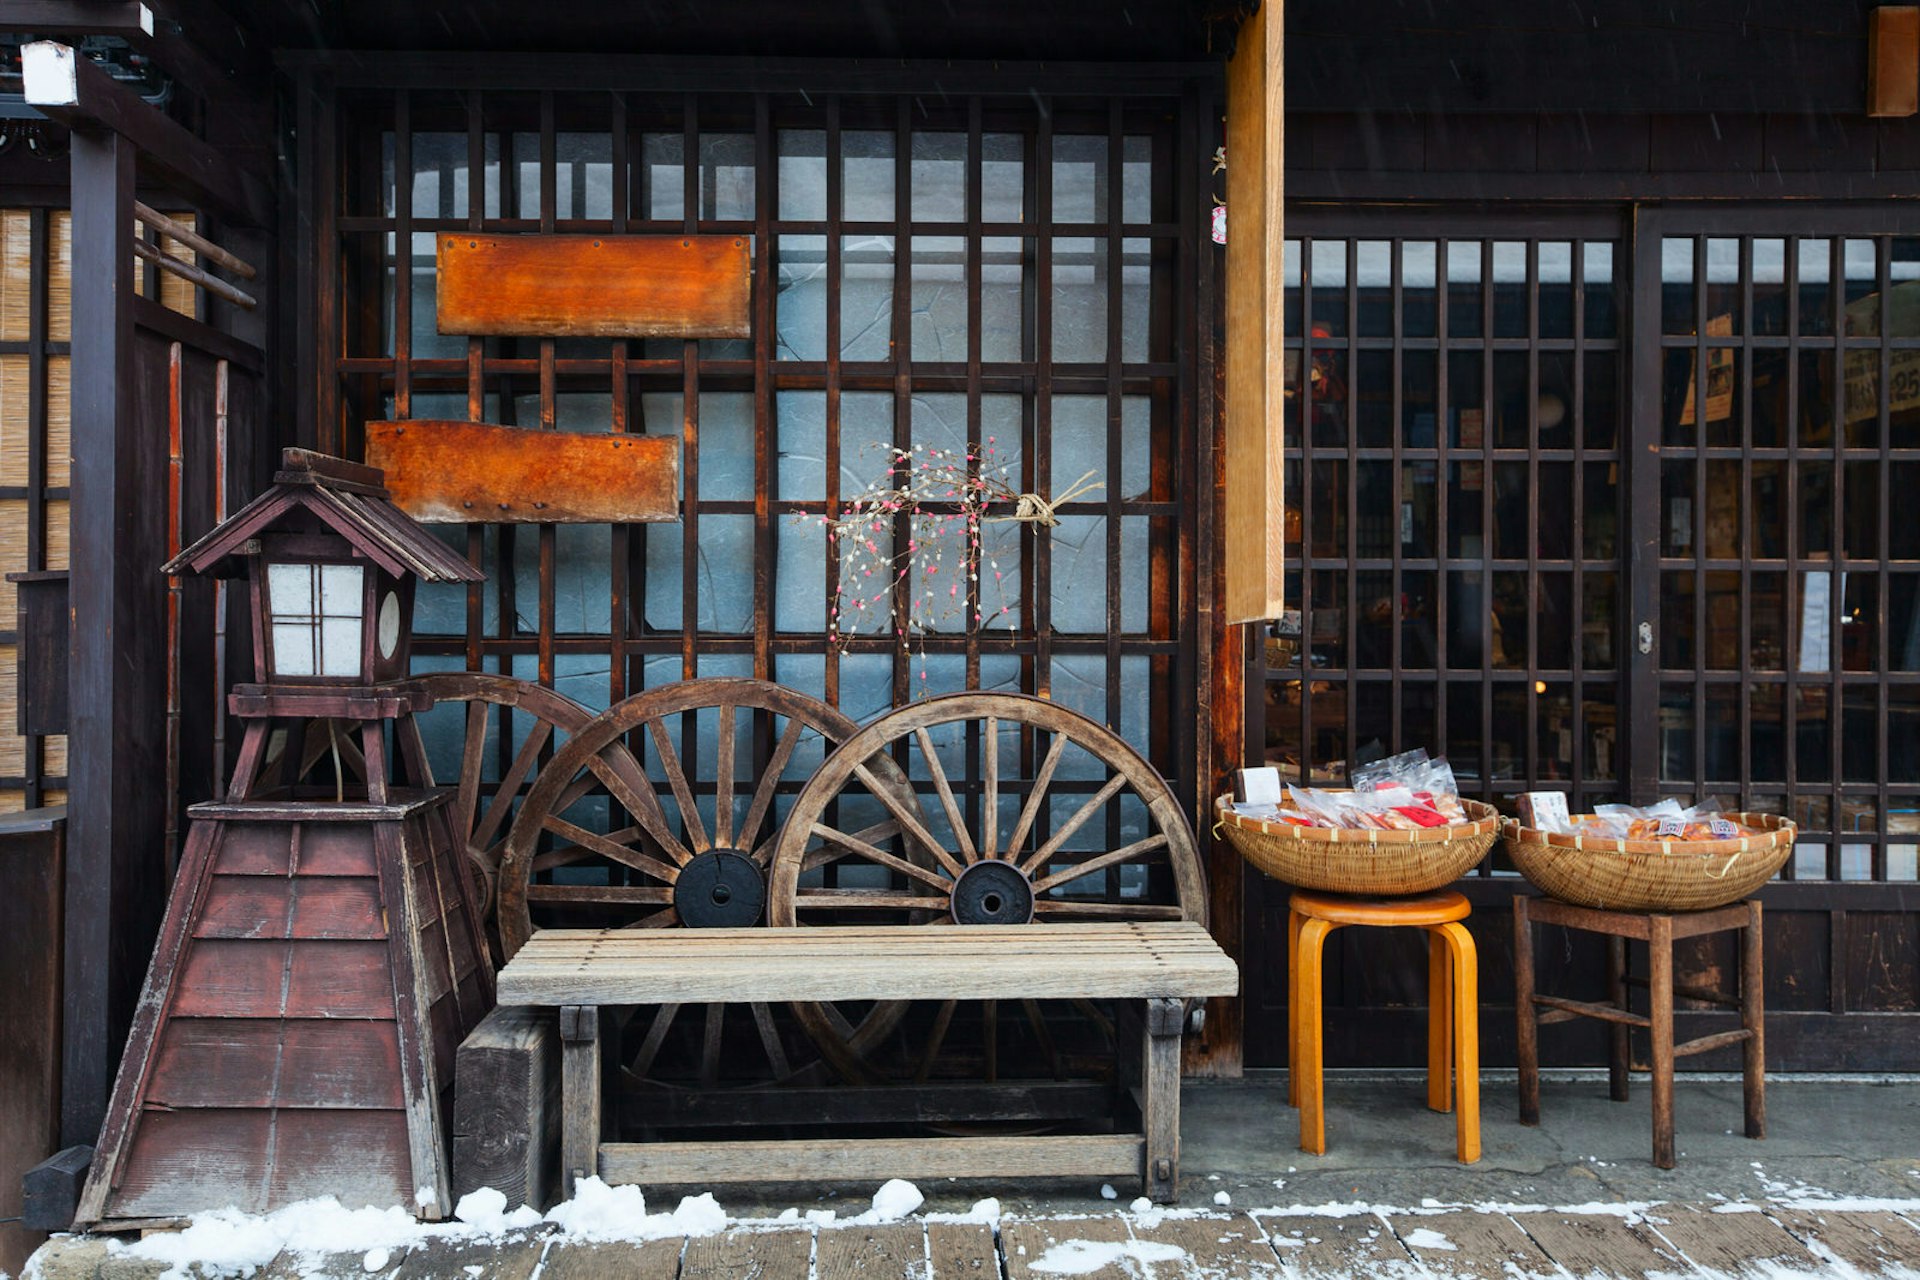 Storefront in Takayama's old town centre